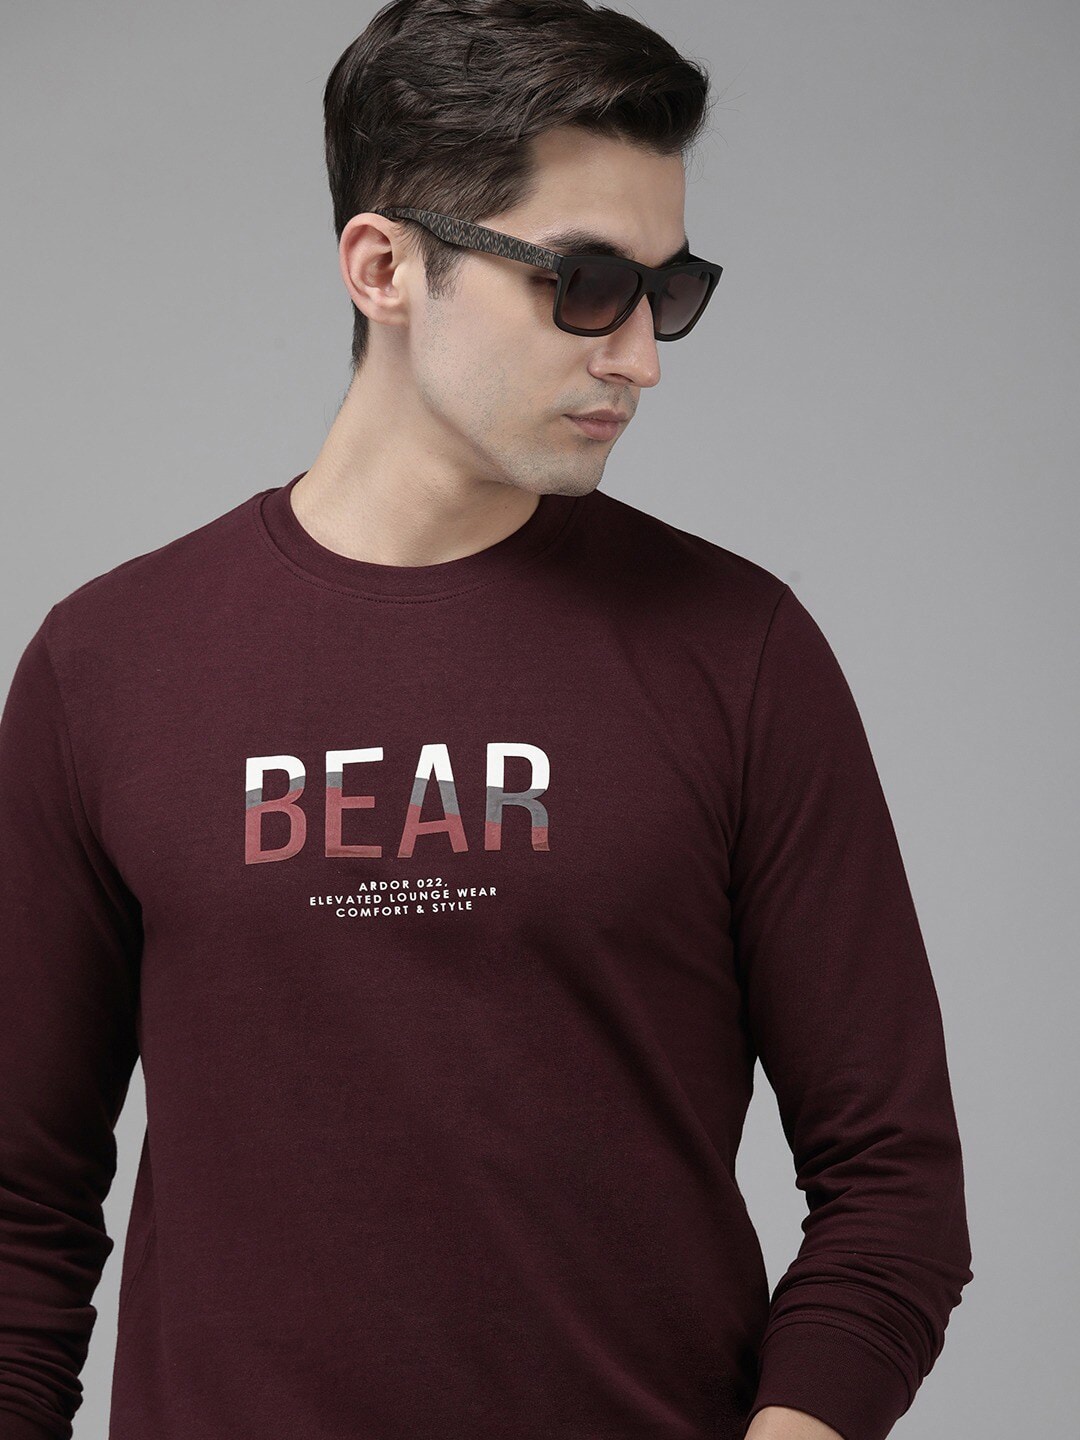 THE BEAR HOUSE Men Typography Printed Slim Fit Pure Cotton T-shirts